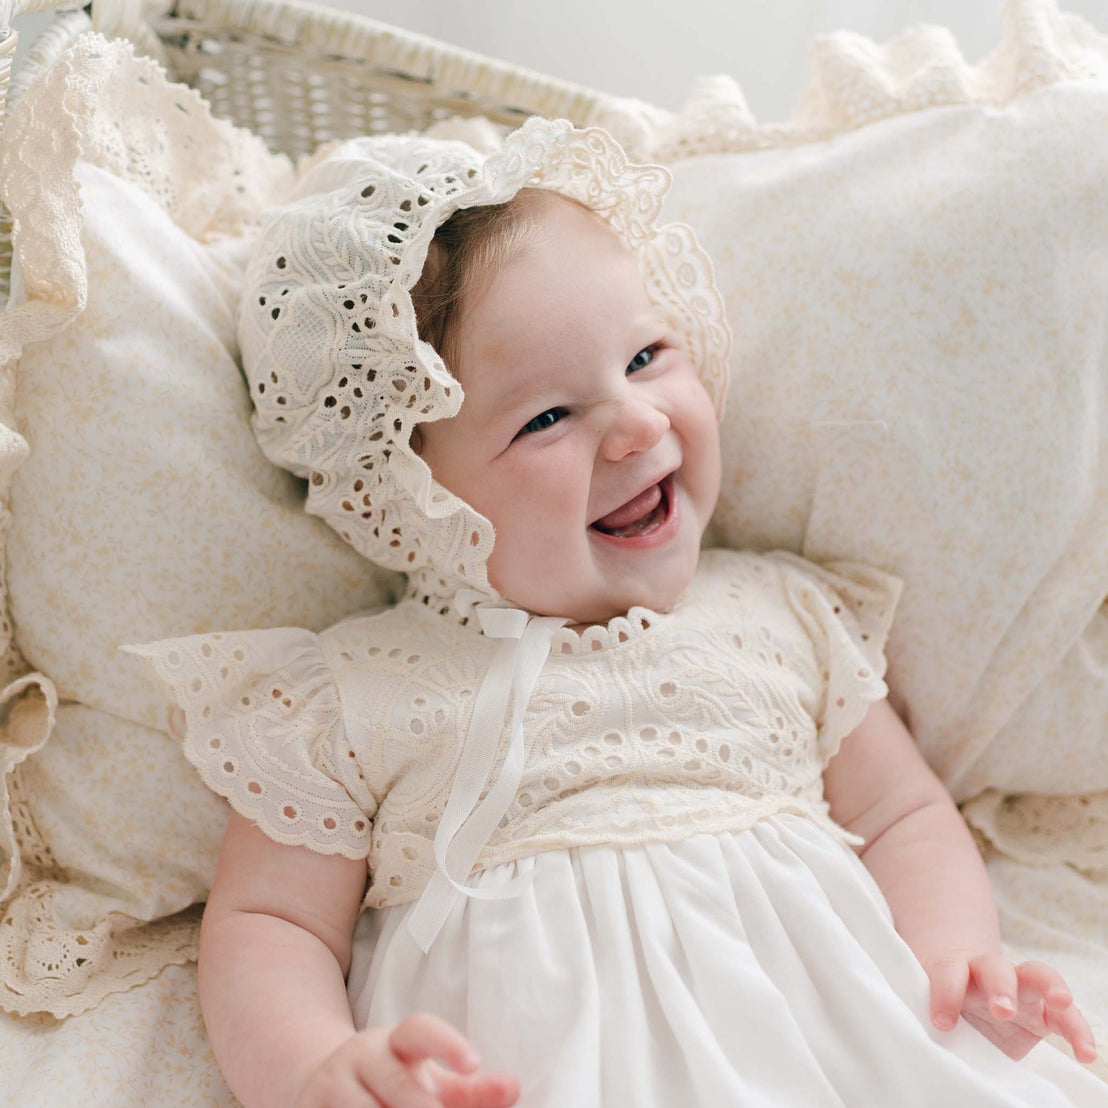 A baby is lying on a pillow, wearing the Ingrid Tiered Gown & Bonnet with beautiful lace details. The baby is smiling brightly with visible dimples, creating a joyful expression. The background includes a lace-trimmed pillow and a woven basket.